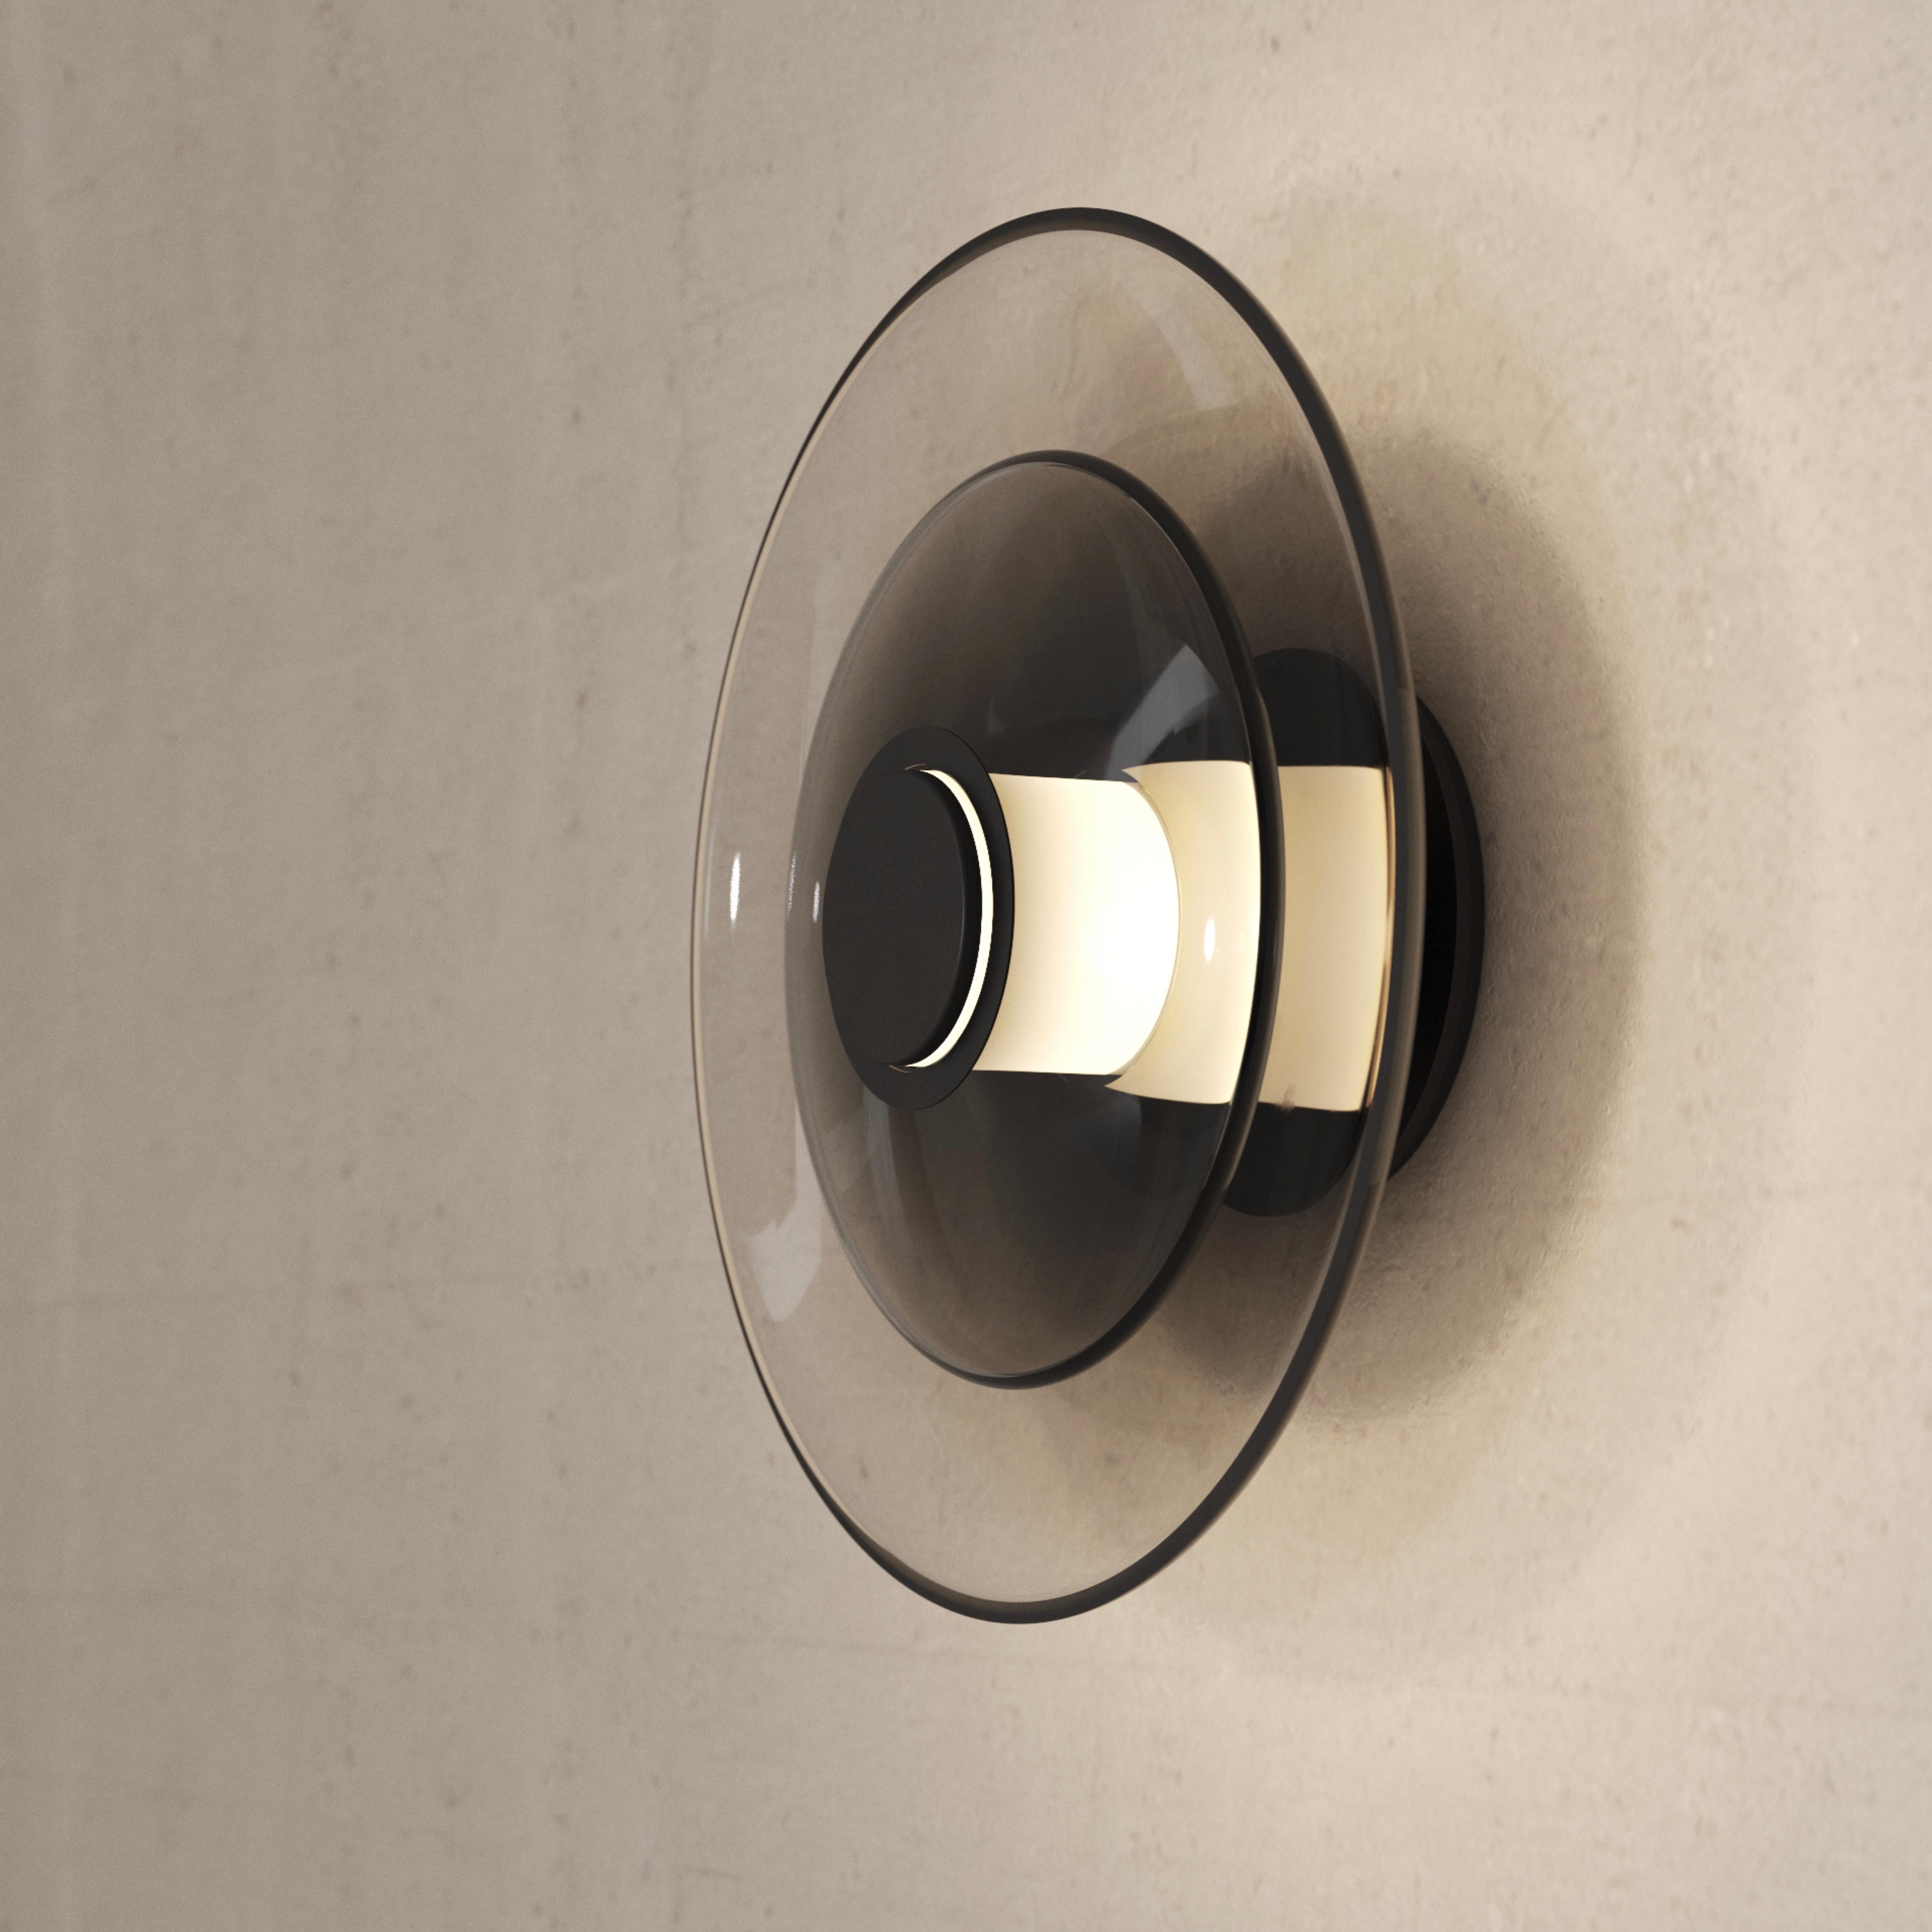 Canadian Luna A Disc Sconce in Blackened Steel For Sale